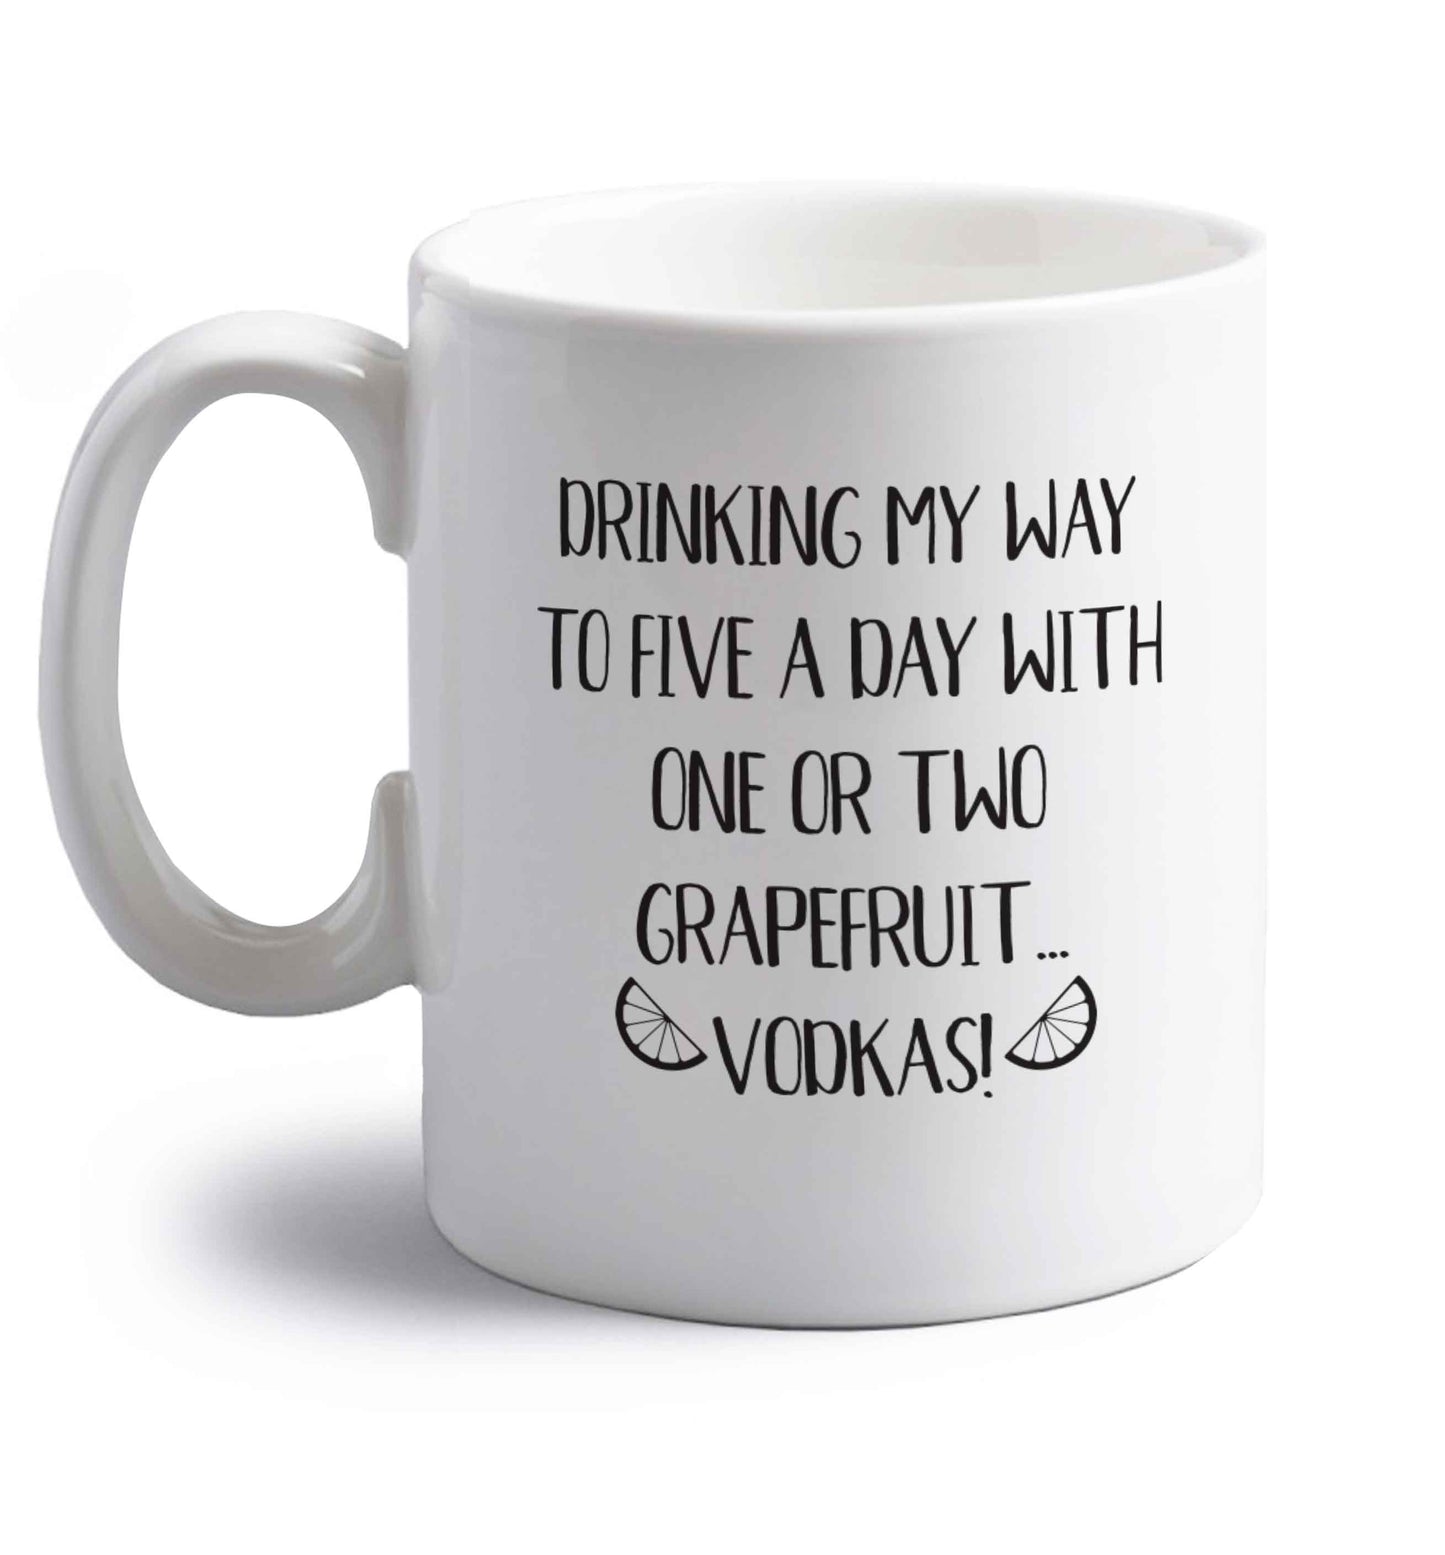 Drinking my way to five a day with one or two grapefruit vodkas right handed white ceramic mug 